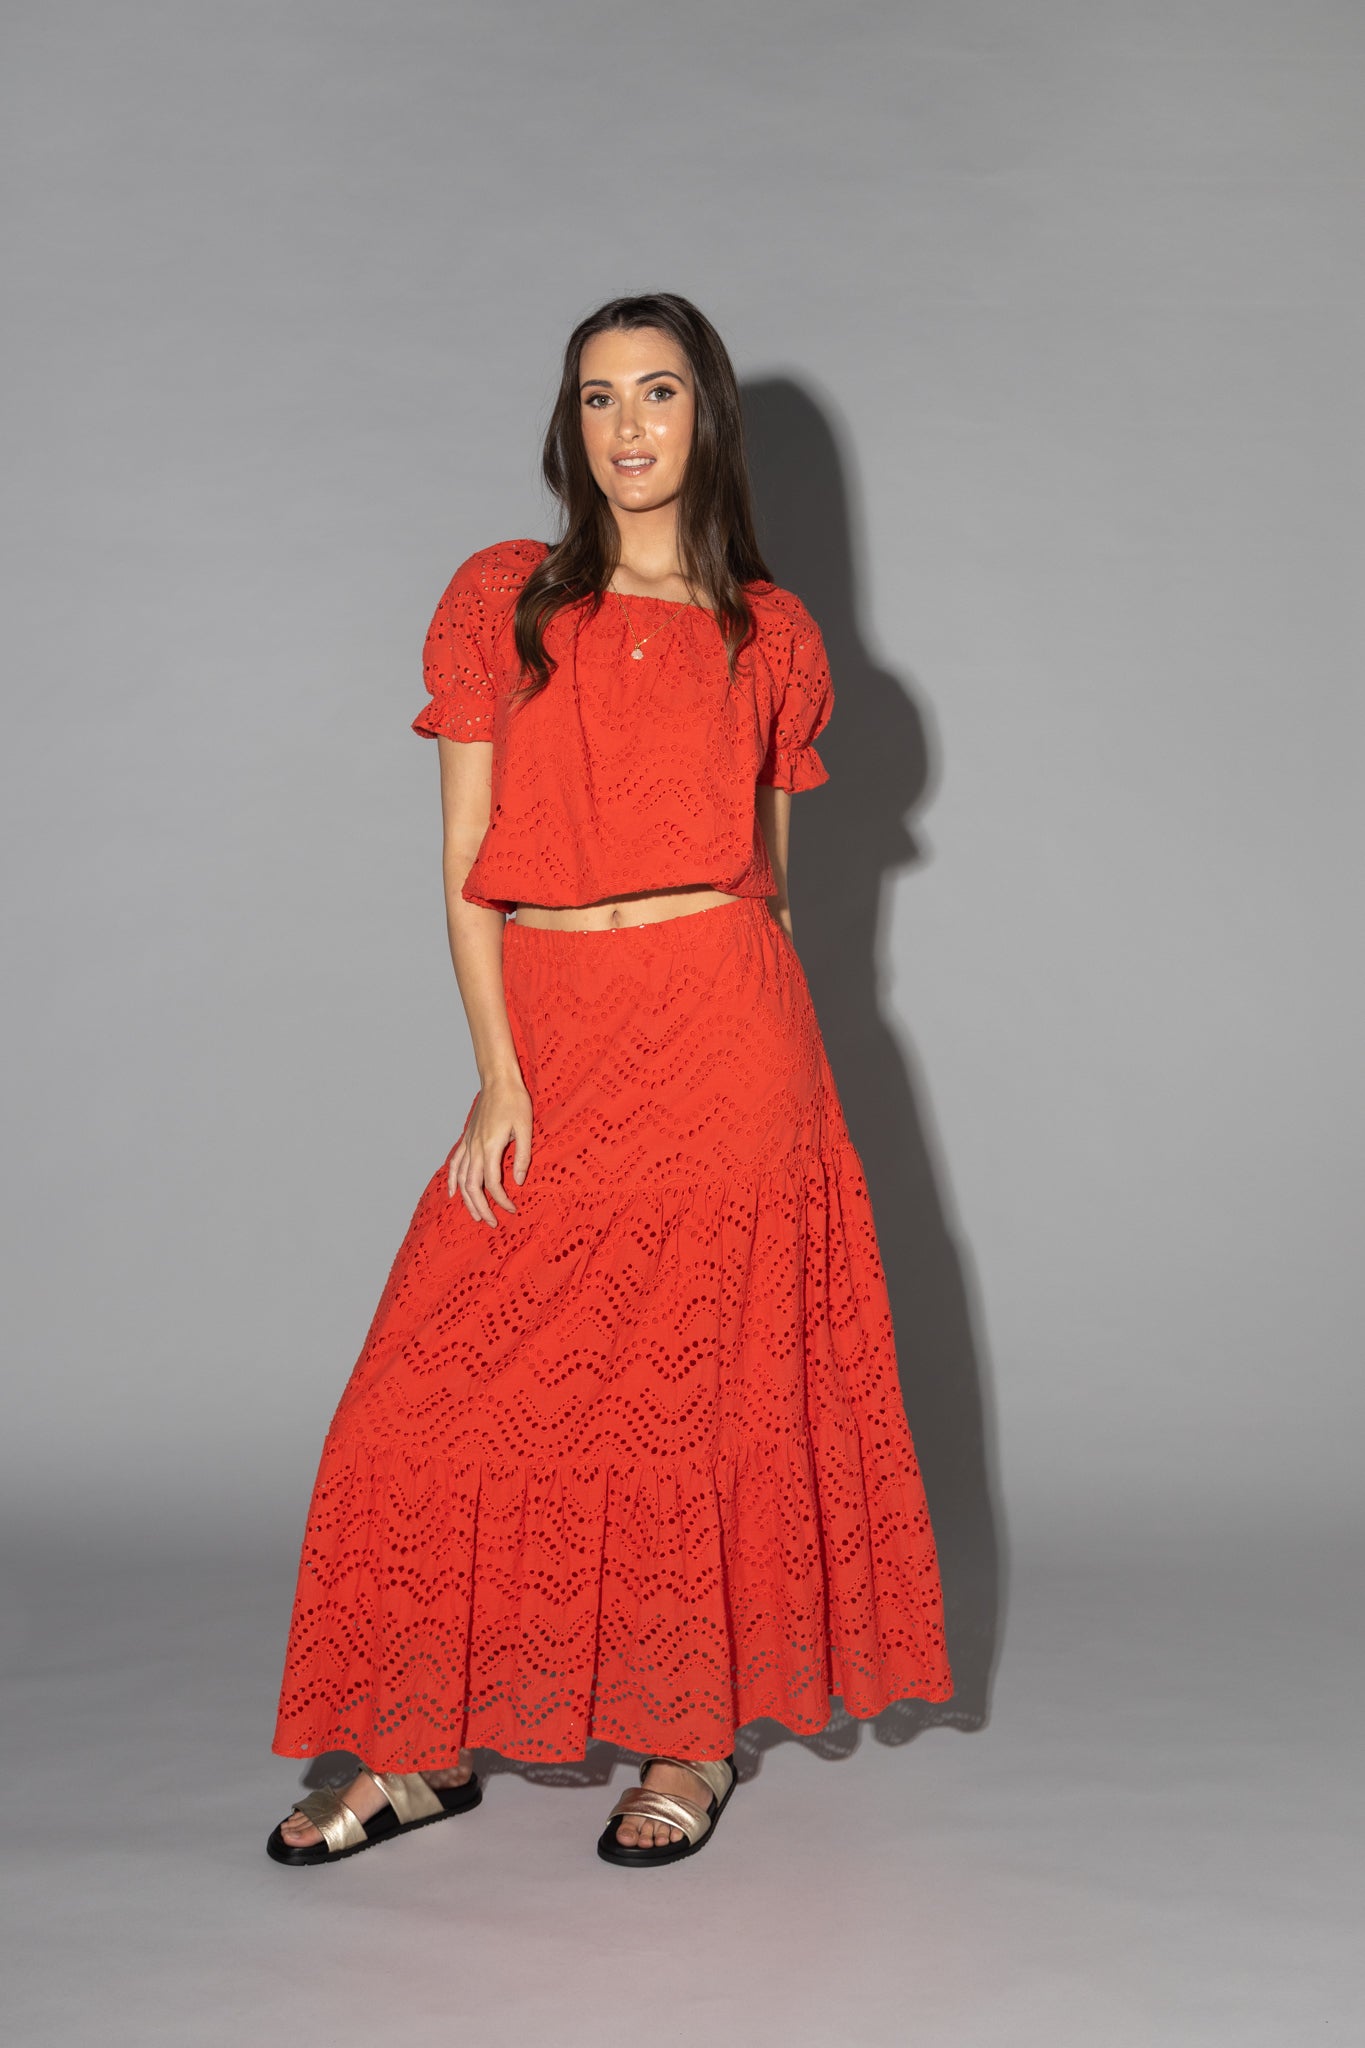 6028 - Mode Skirt - Coral Lace